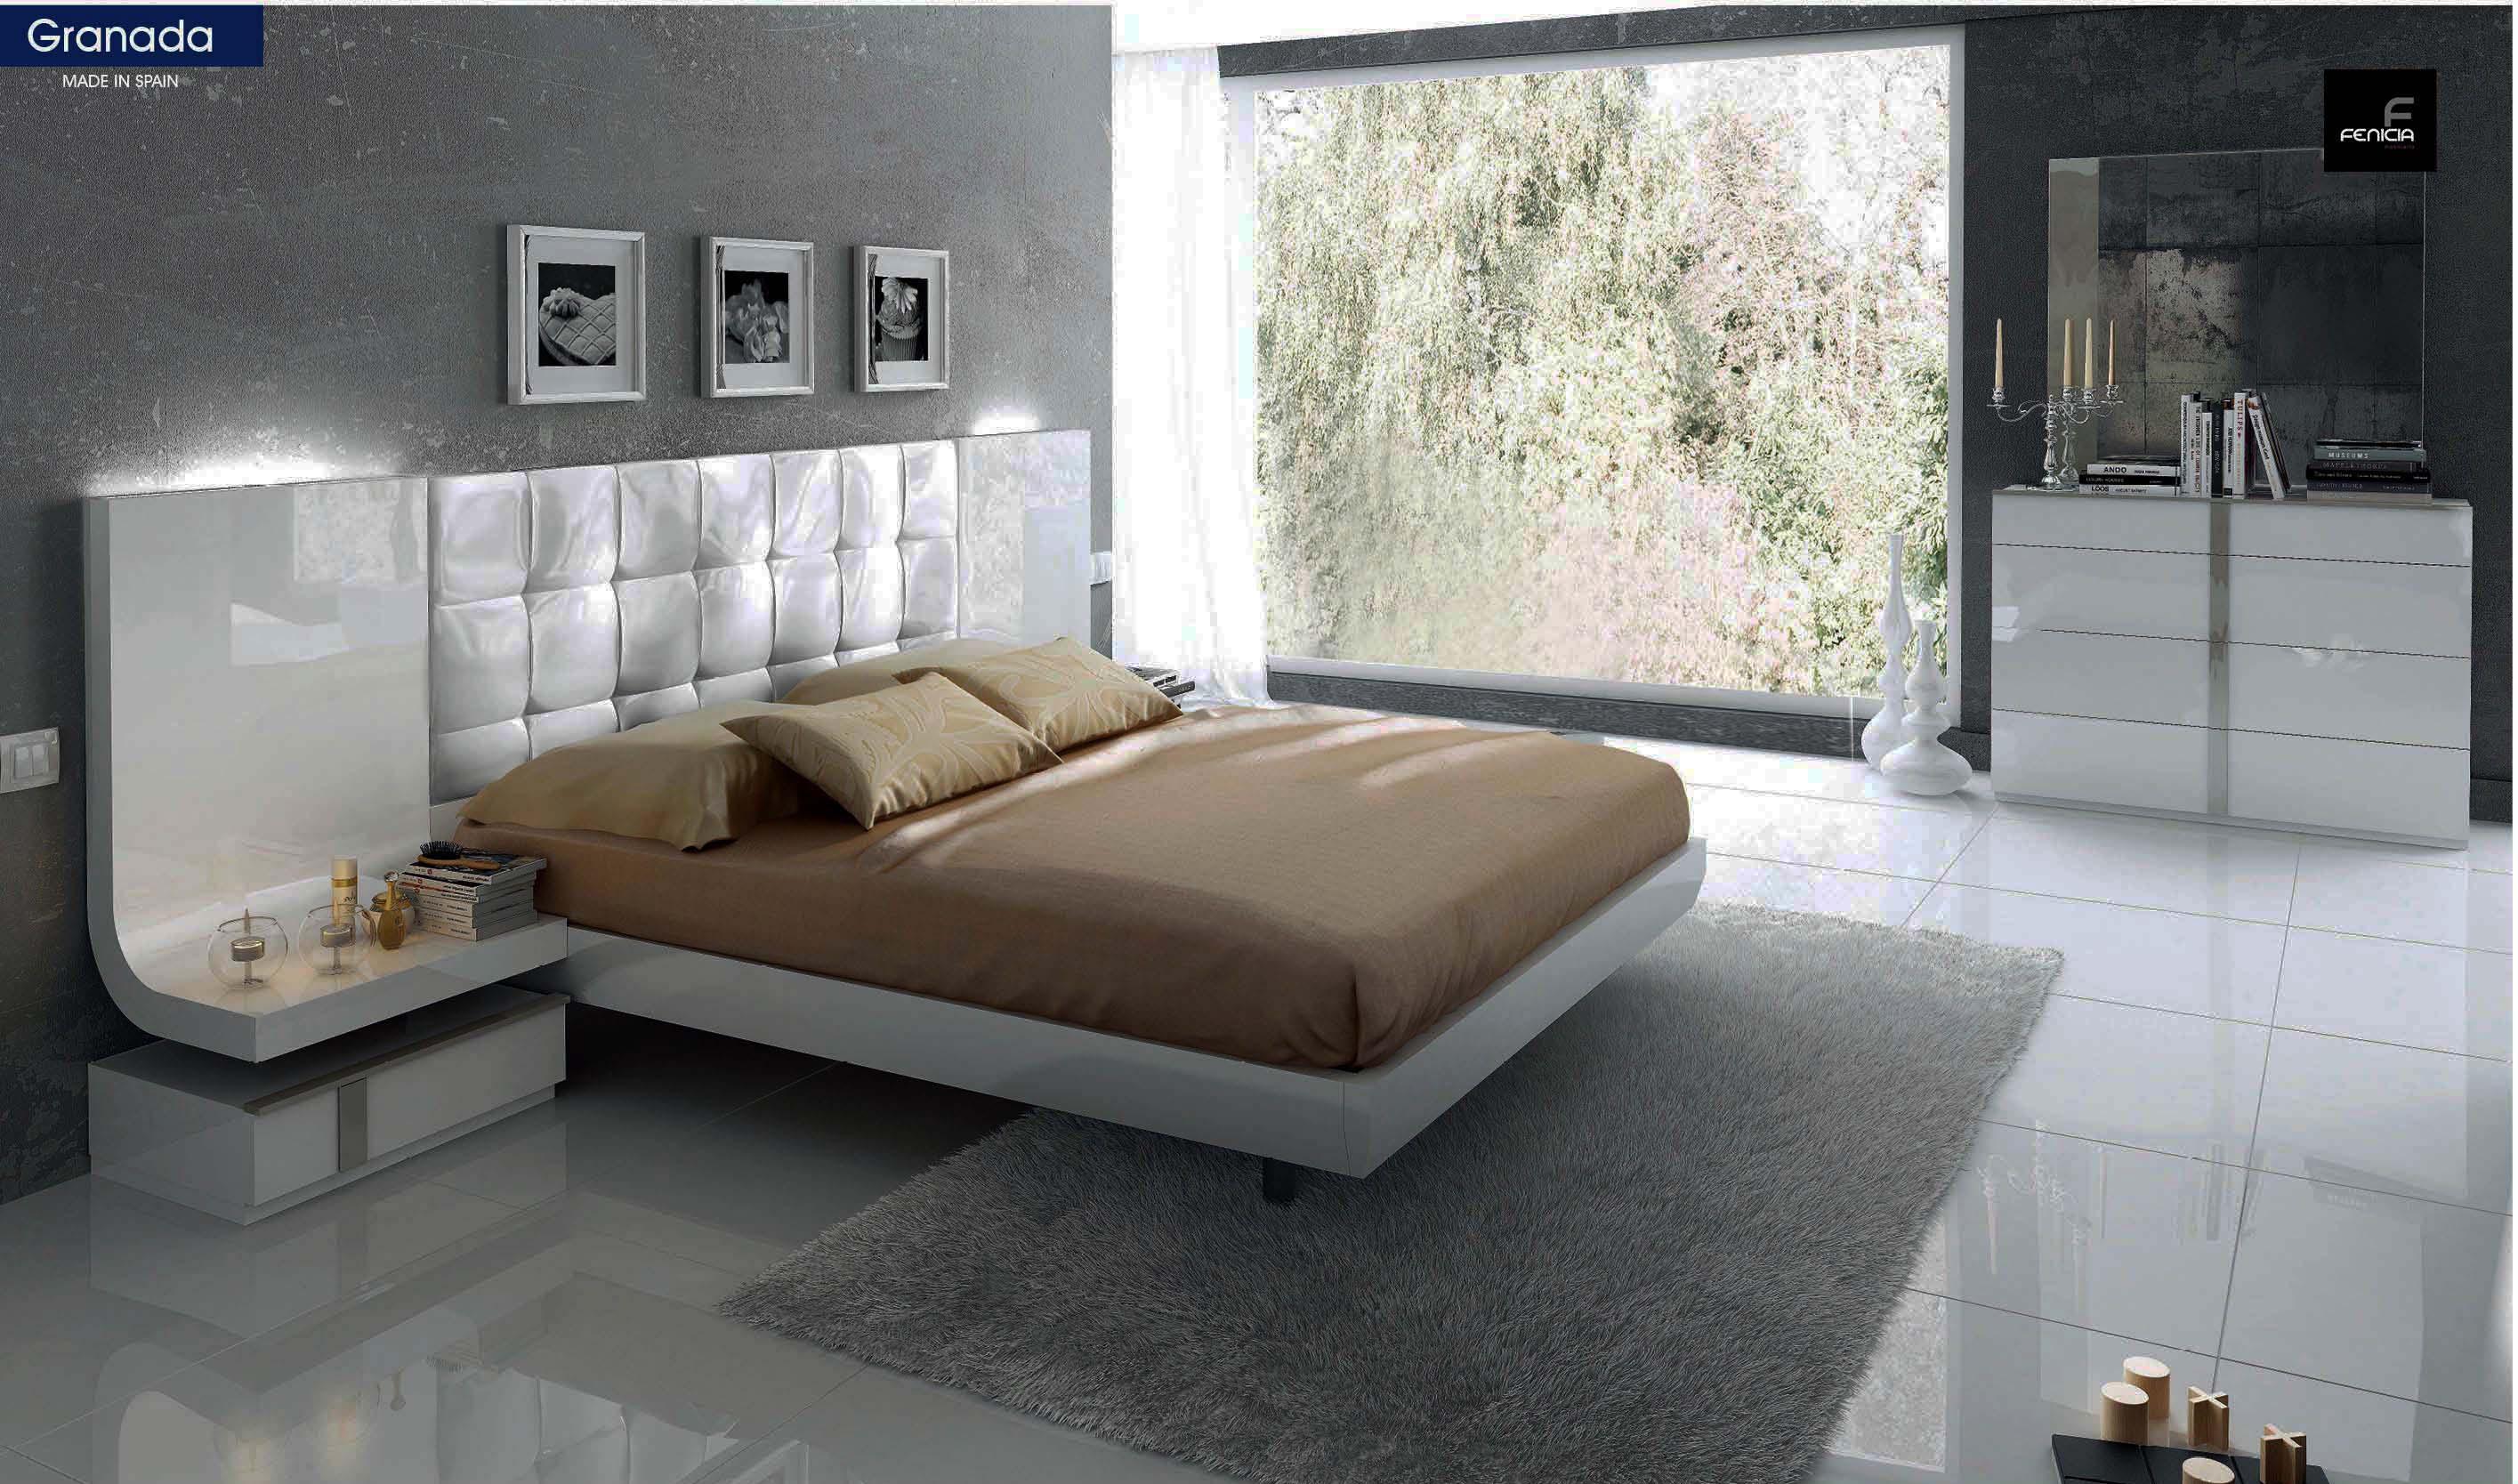 

    
Glossy White King Bedroom Set 5Pcs Contemporary Made in Spain ESF Granada
